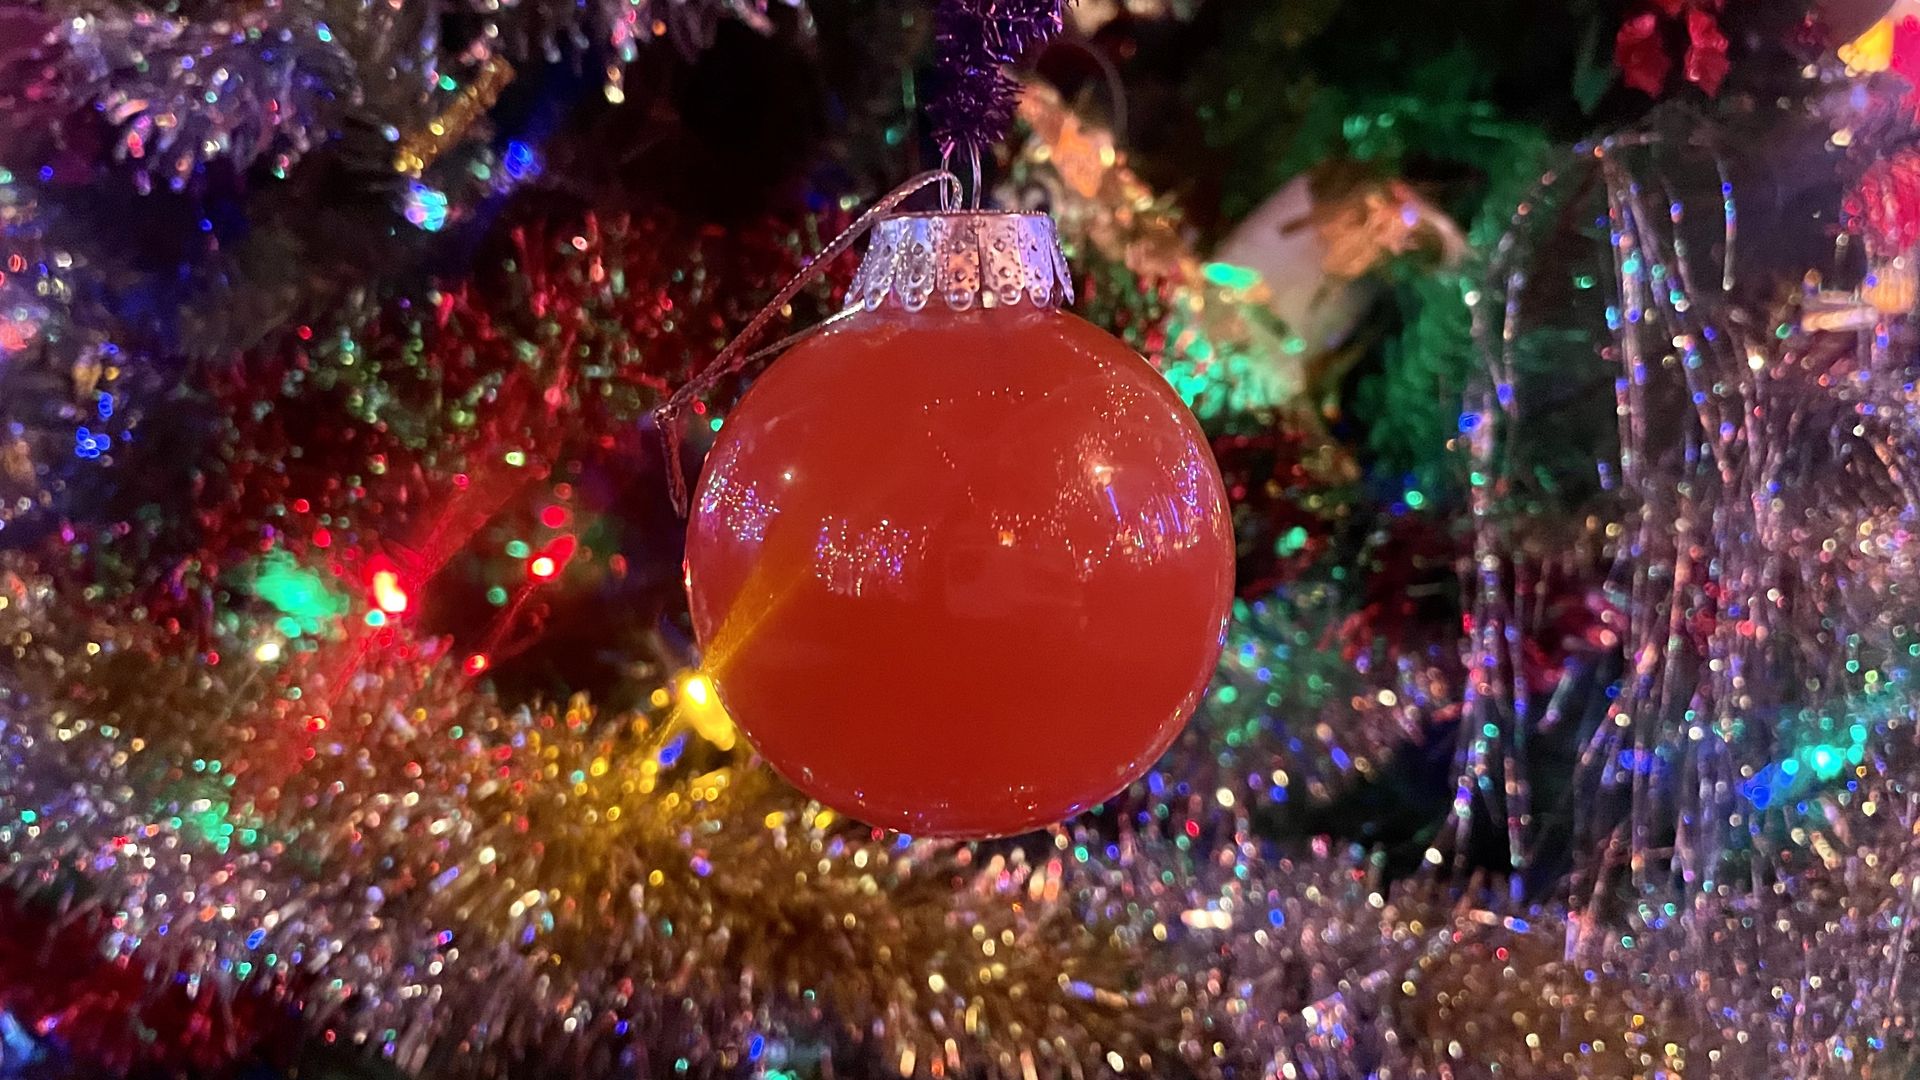 A clear plastic ornament filled with a red liquid.